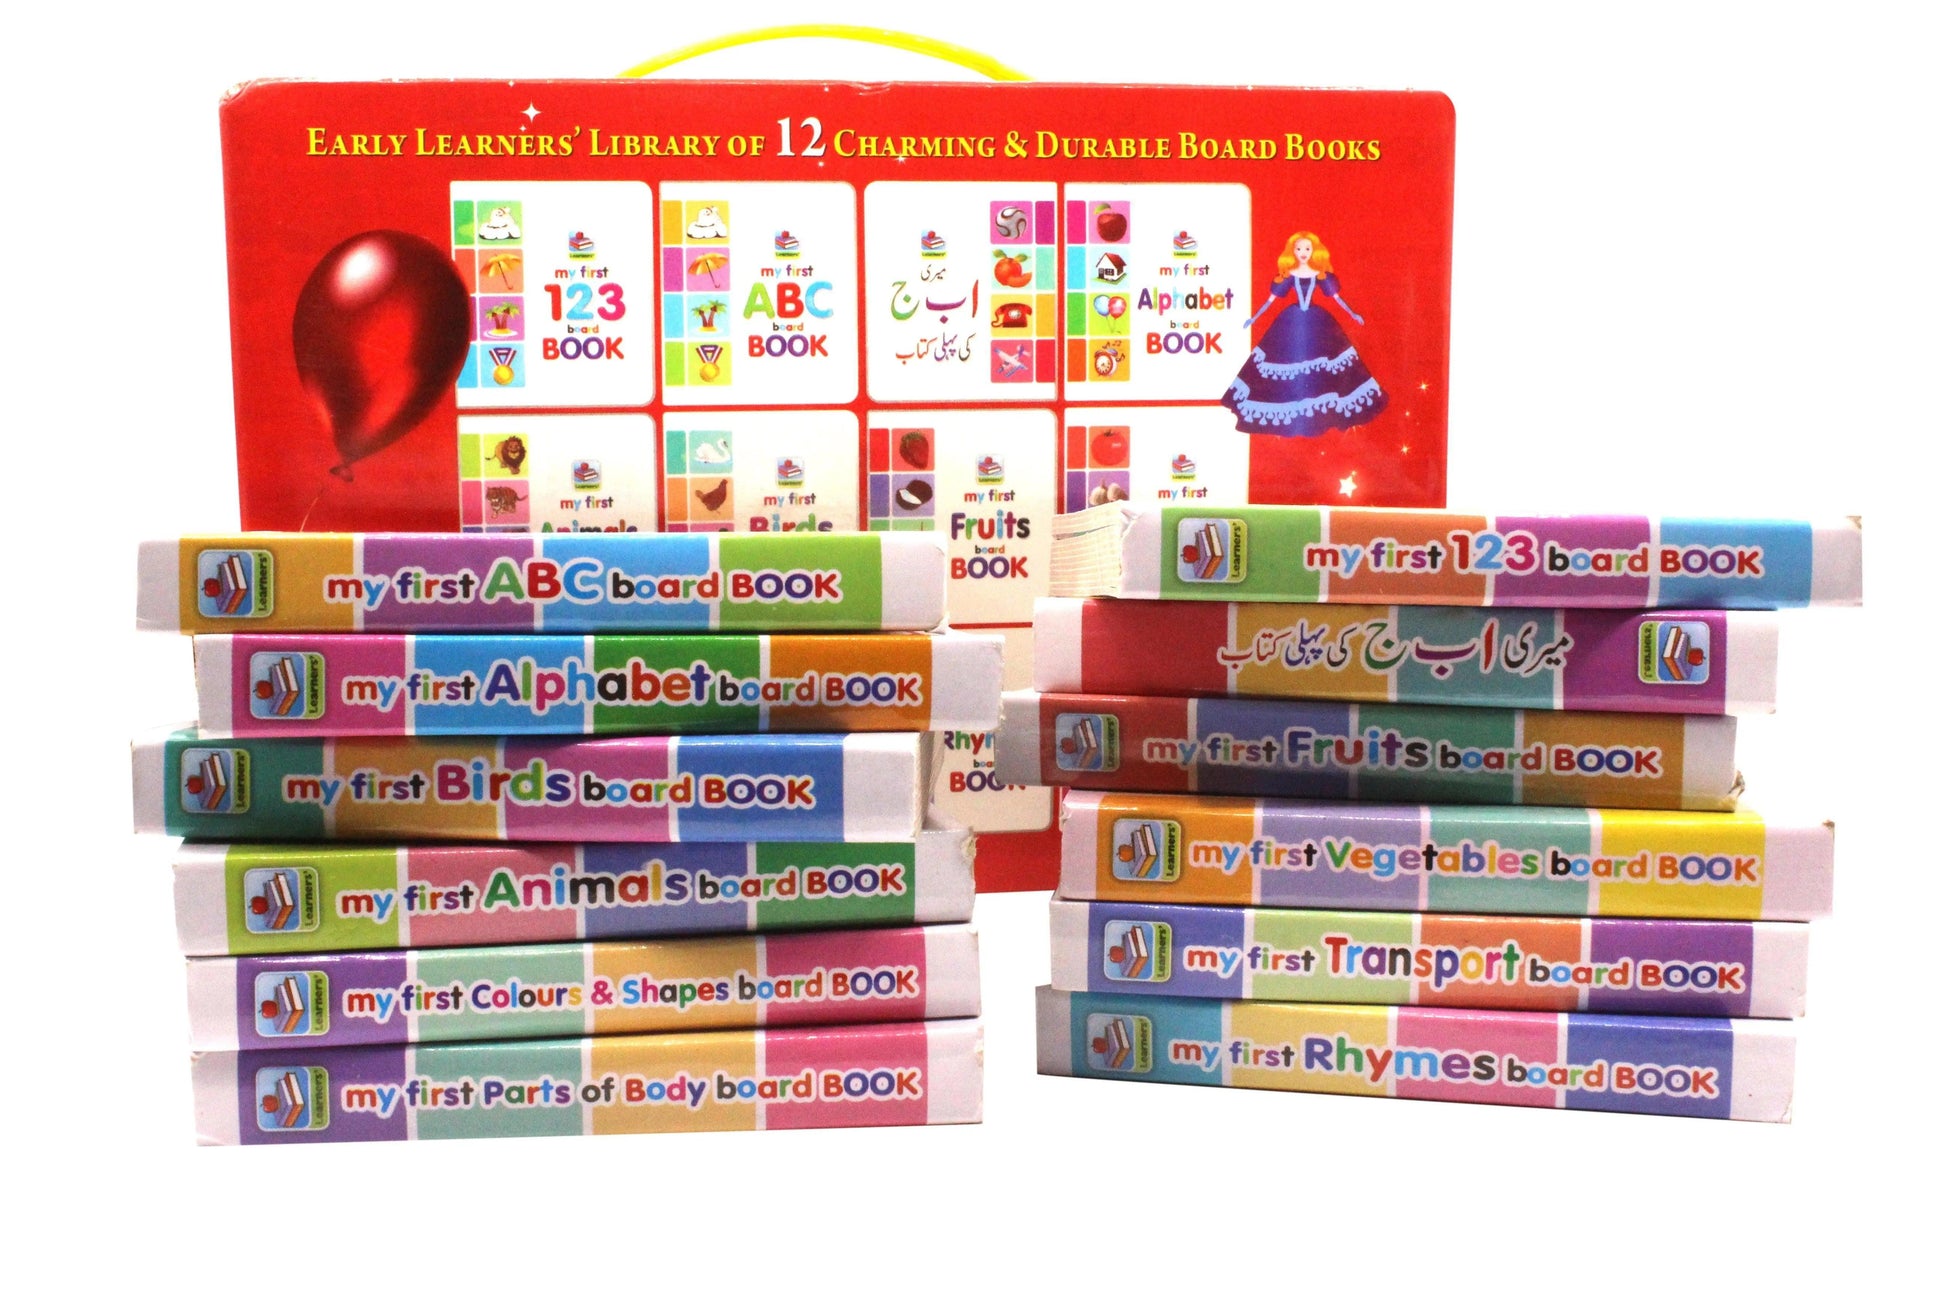 Early Learners Library of 12 Charming & Durable Board Books The Stationers